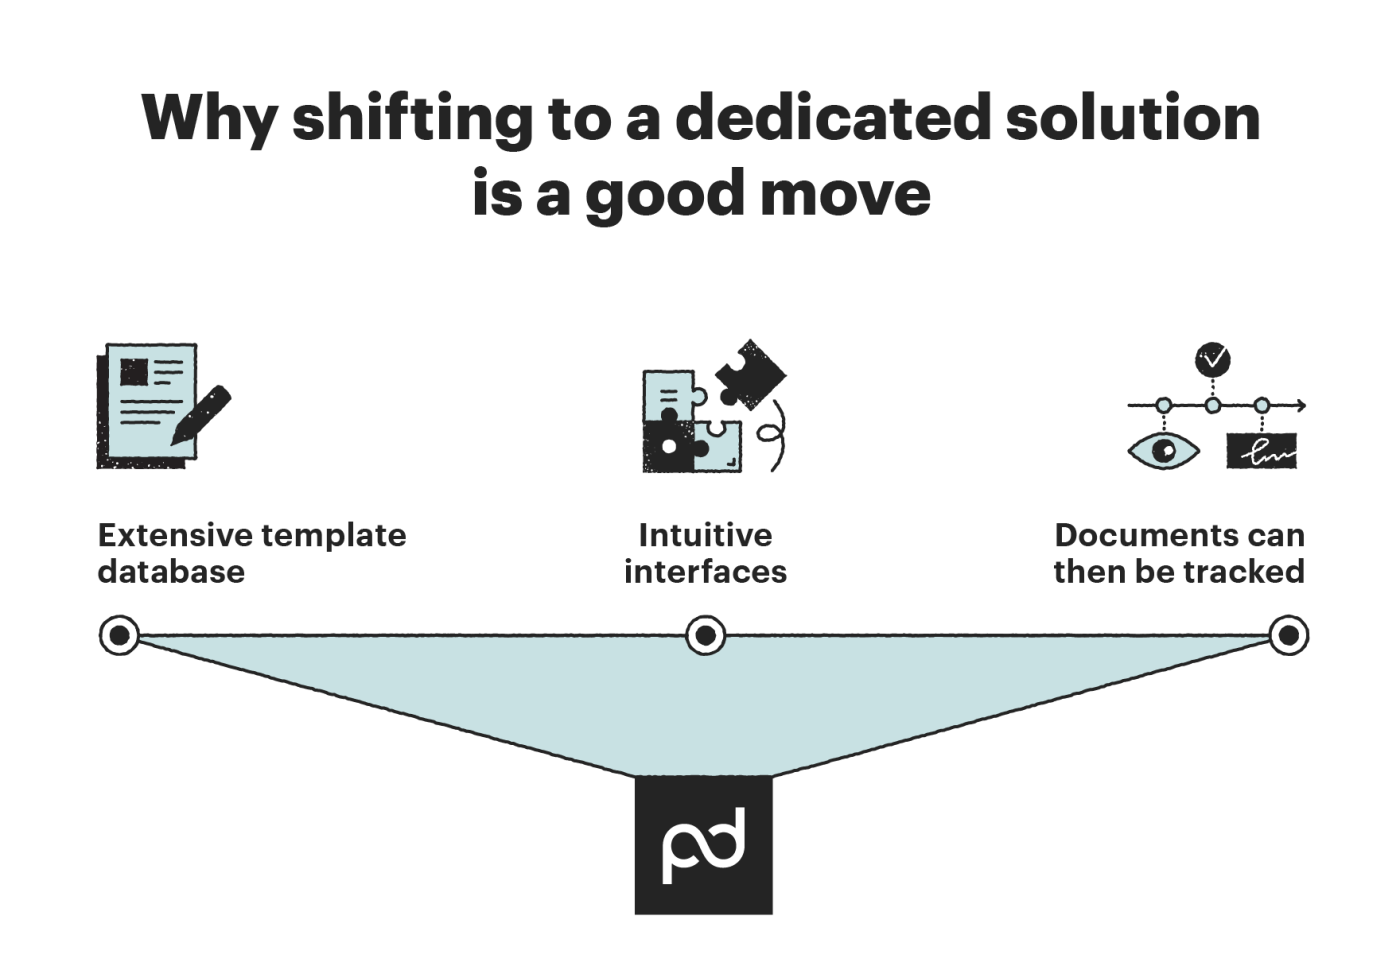  Why-shifting-to-a-dedicated-solution-is-a-good-move